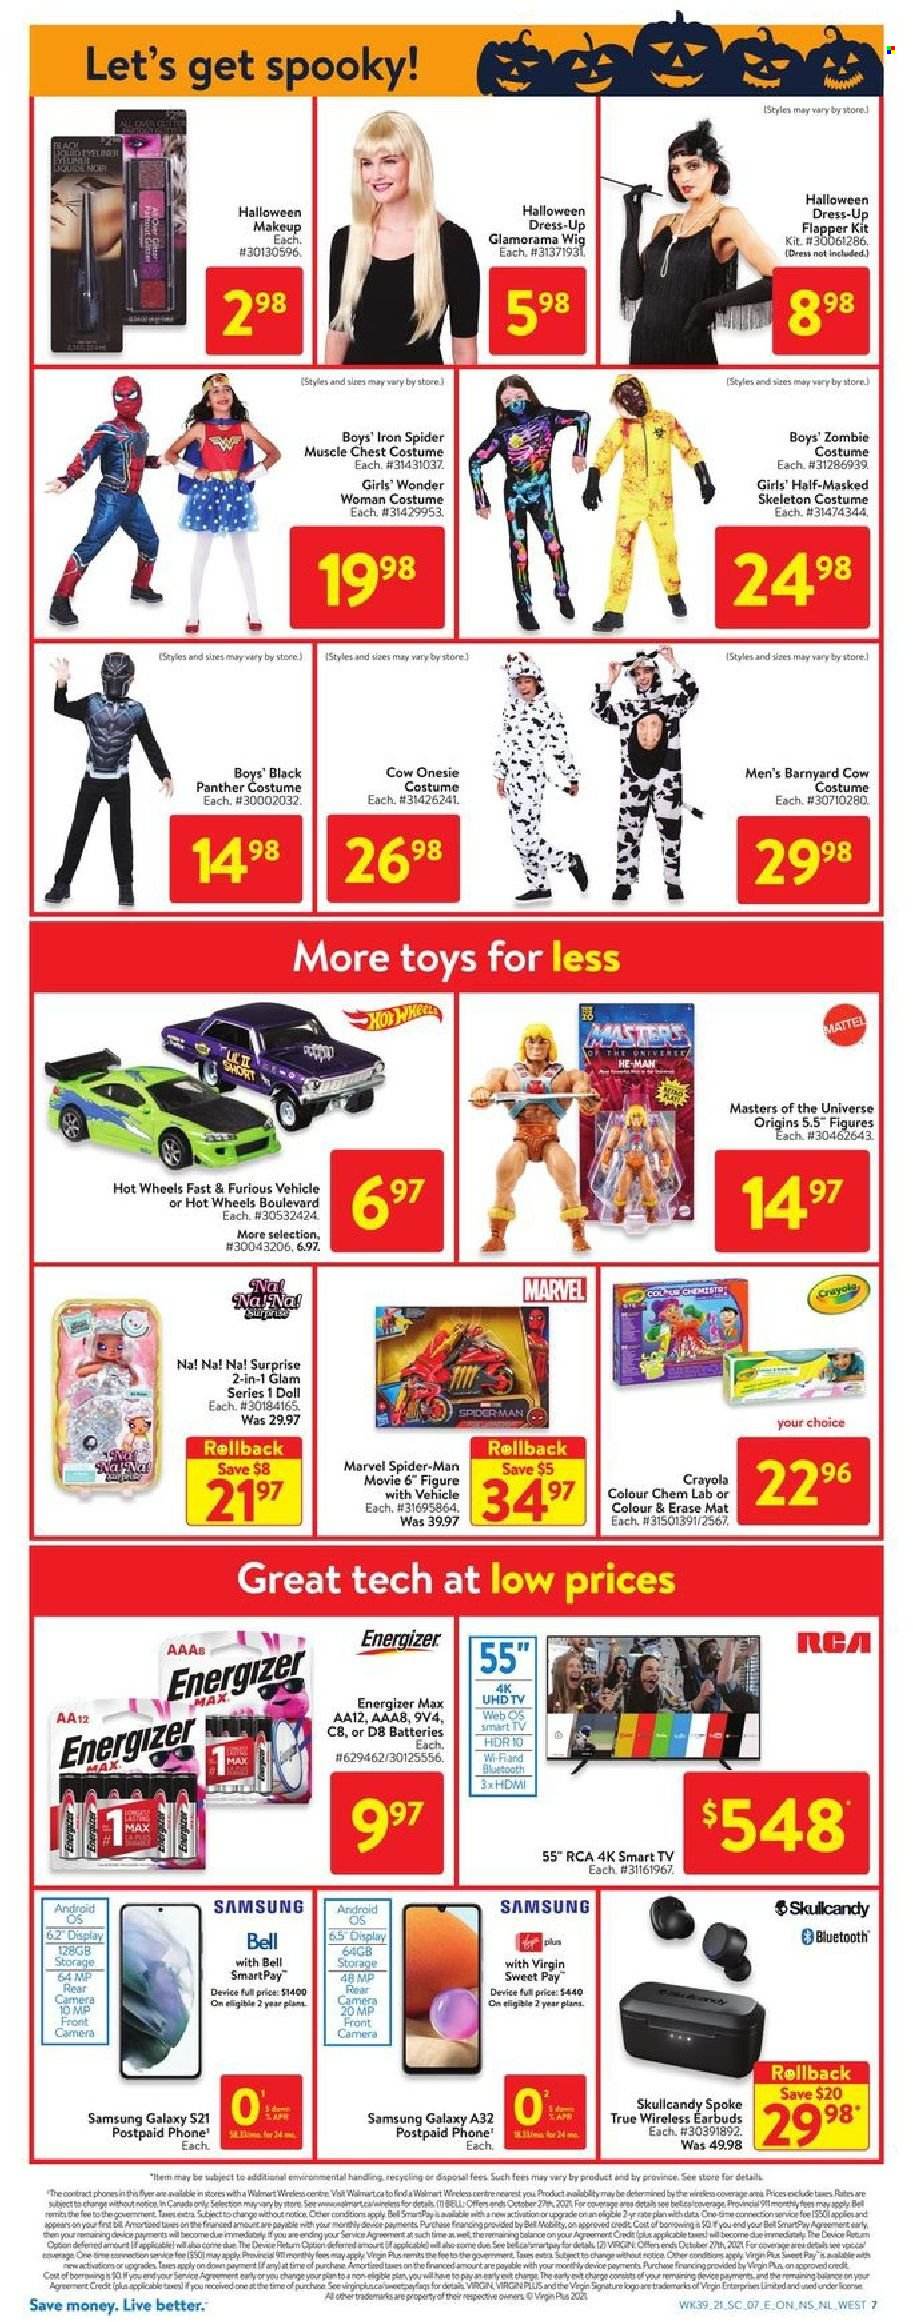 thumbnail - Walmart Flyer - October 21, 2021 - October 27, 2021 - Sales products - webos, Samsung Galaxy, L'Or, Hot Wheels, makeup, crayons, battery, He-Man, Samsung, phone, Samsung Galaxy S, Samsung Galaxy S21, RCA, 4K UHD TV, UHD TV, TV, Skullcandy, earbuds, iron, Halloween, dress, costume, doll, Mattel, toys, vehicle, Zombie, Energizer, smart tv. Page 15.